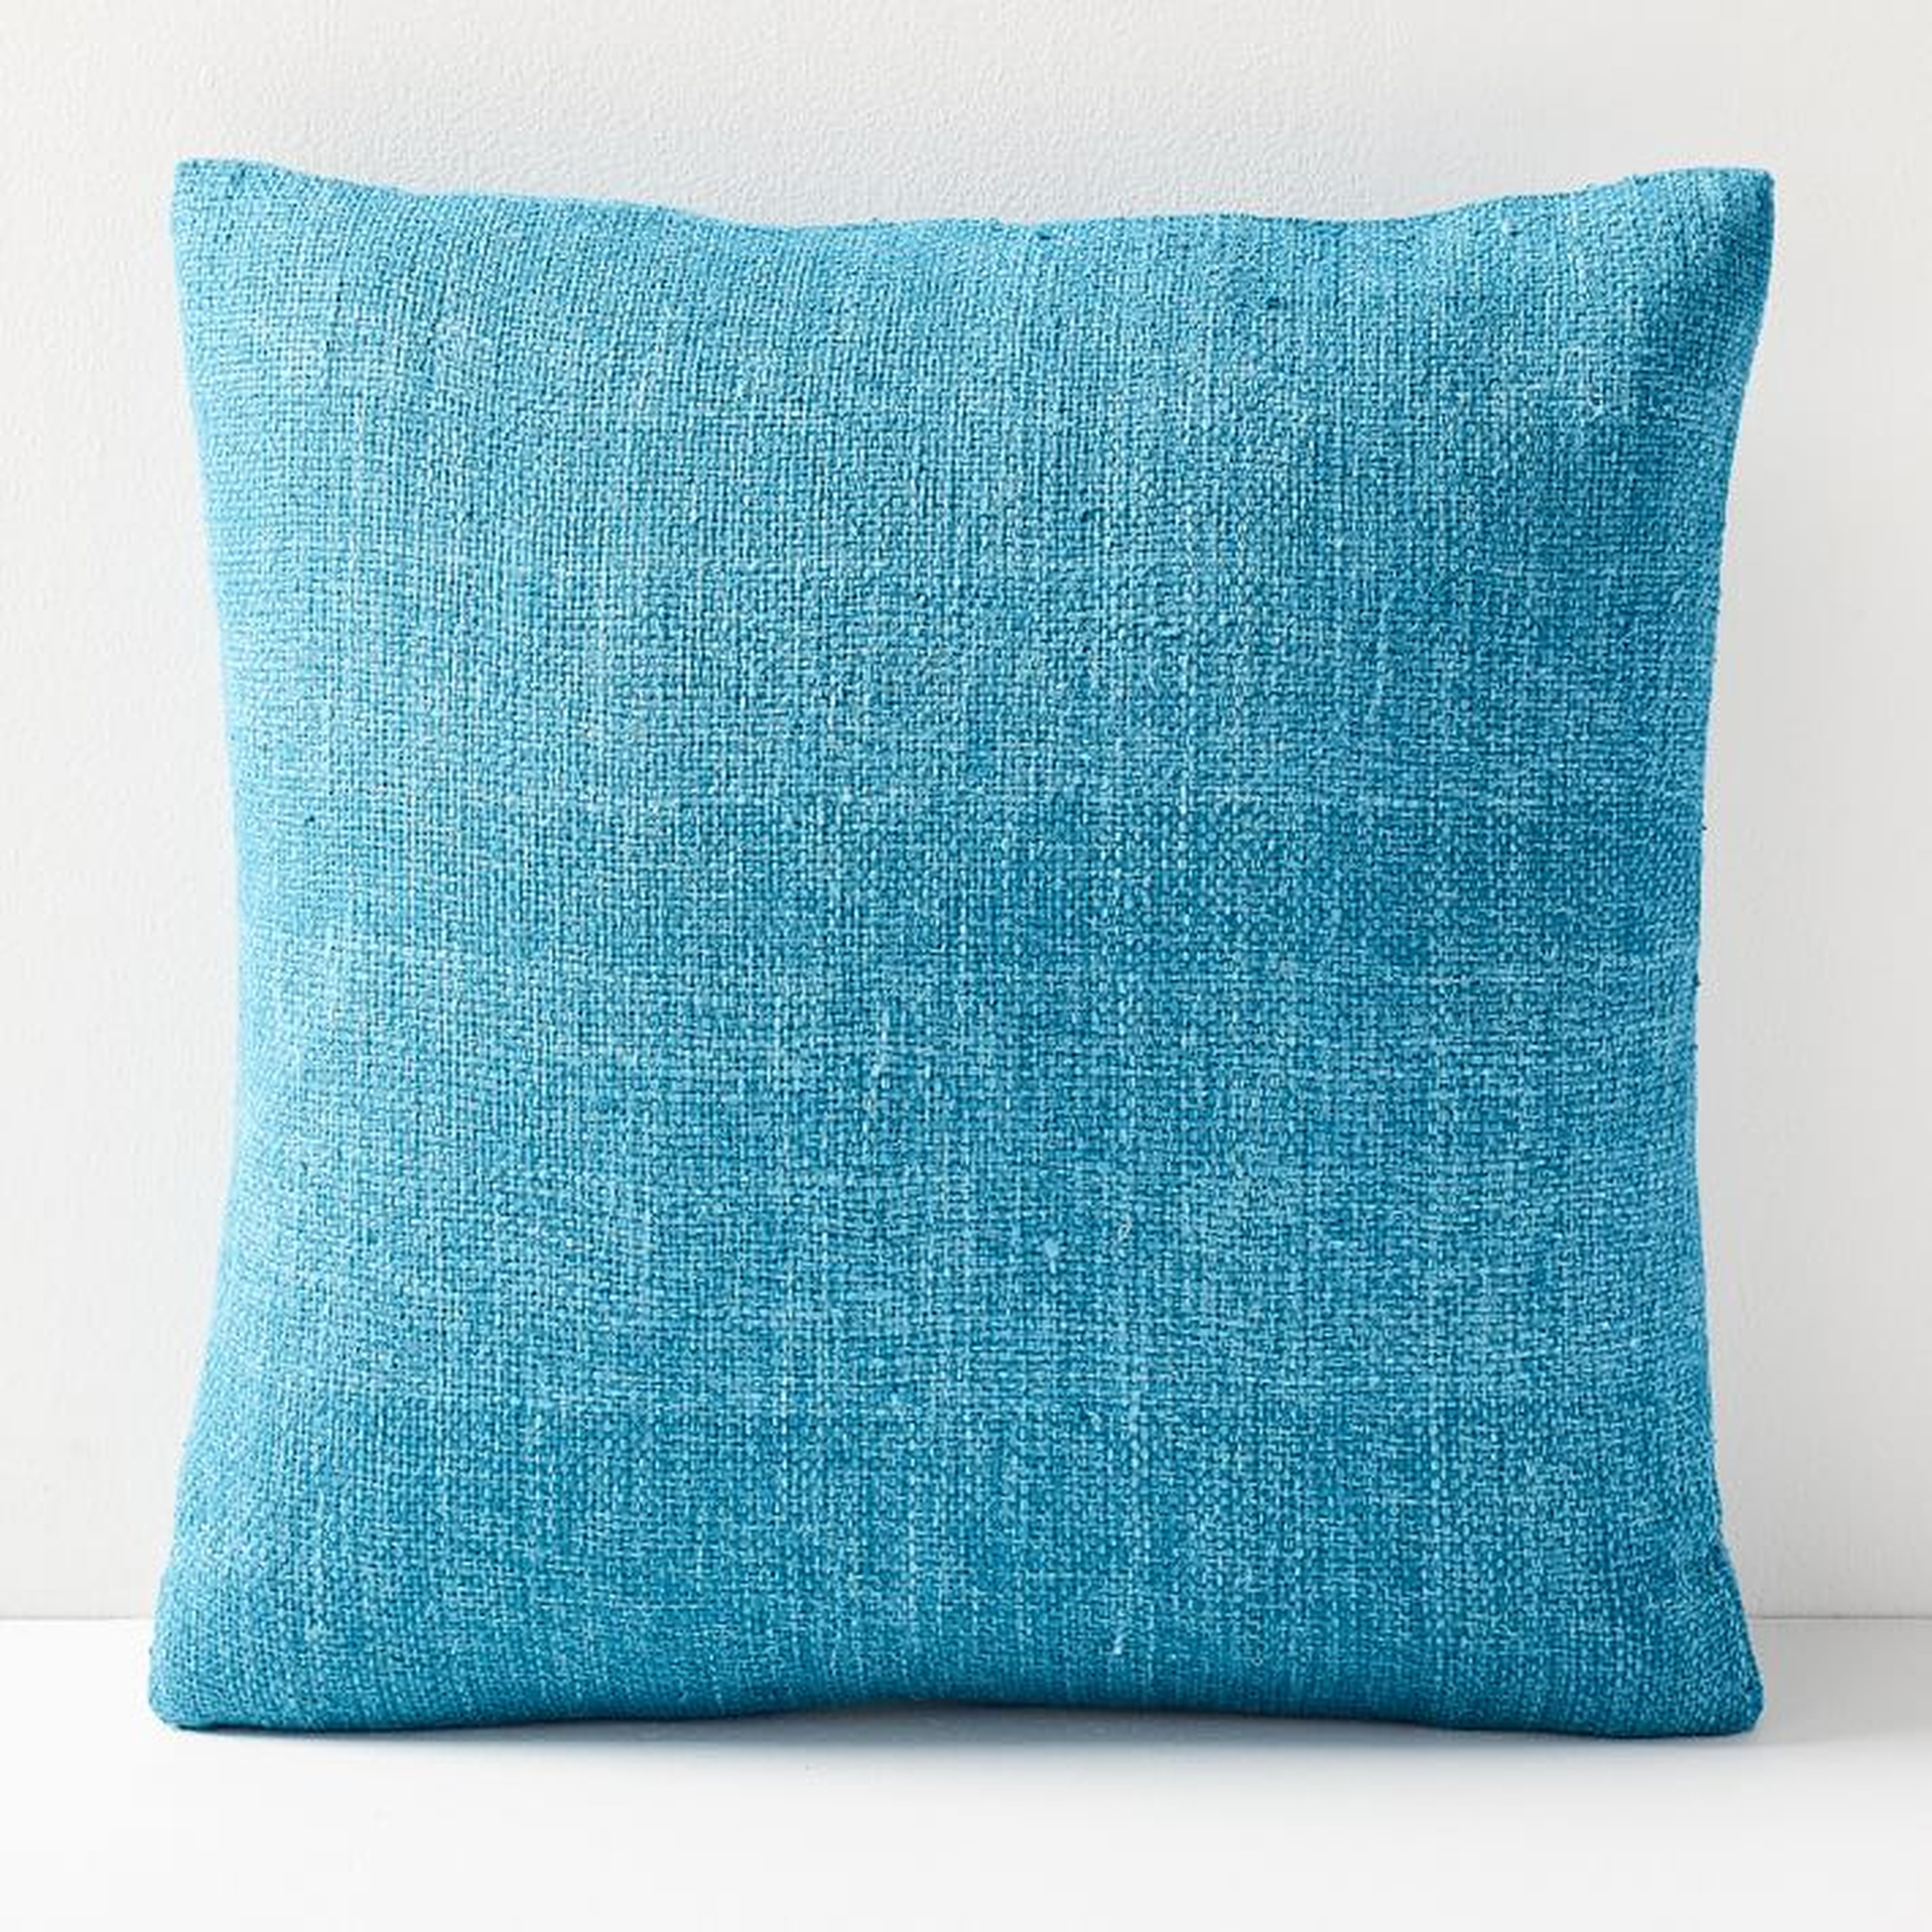 Silk Hand-Loomed Pillow Covers, Blue Teal - West Elm